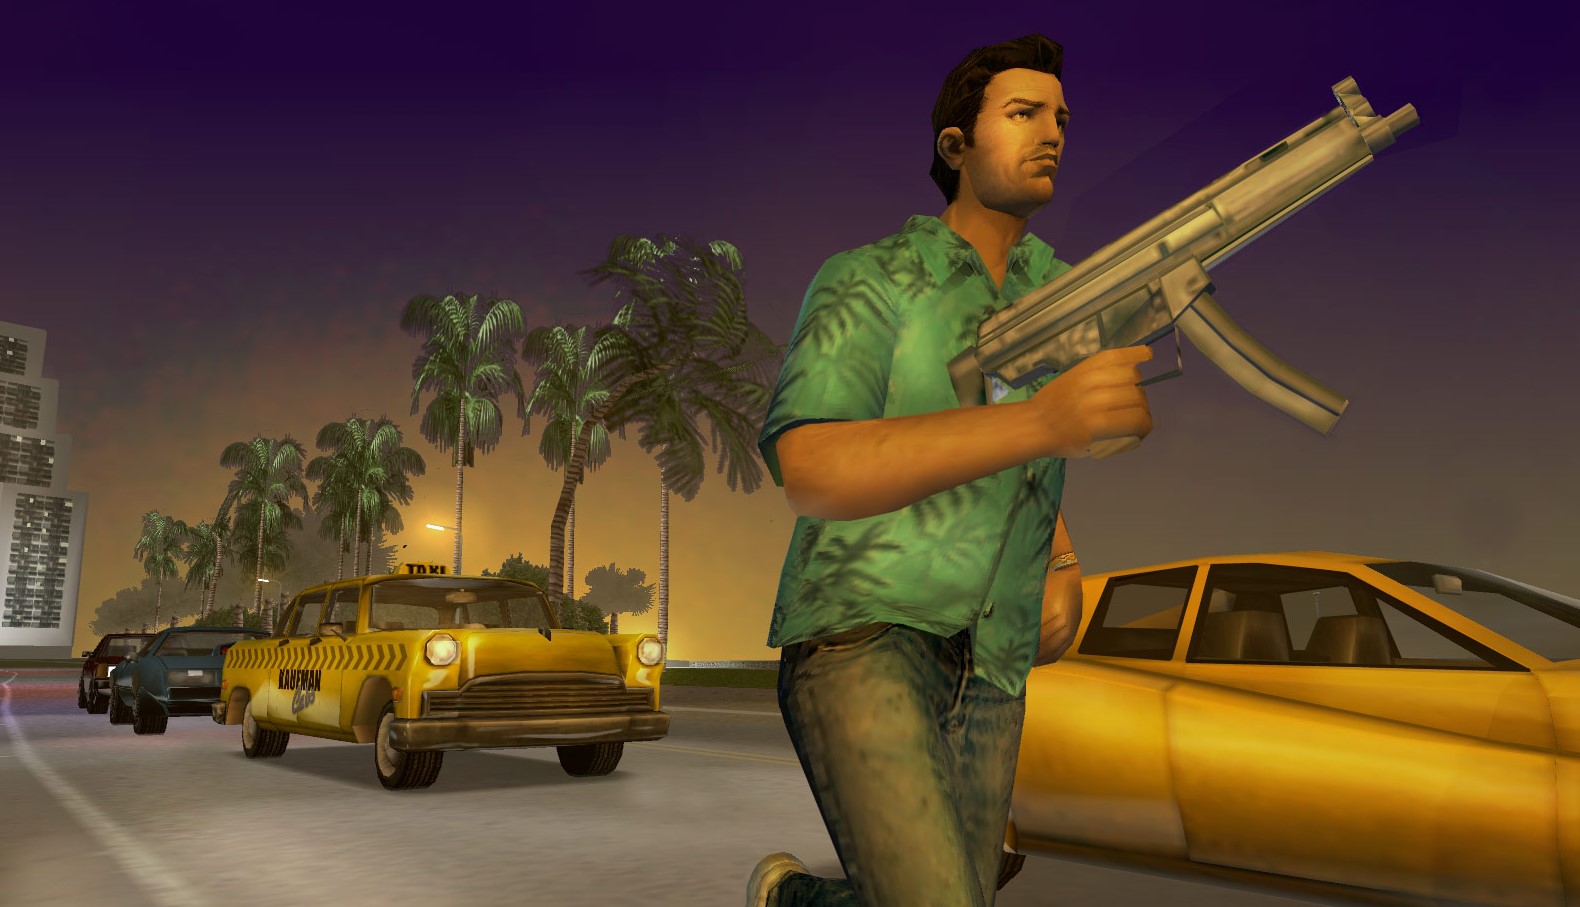 GTA 3 vs GTA Vice City graphics: Which game has better visuals?